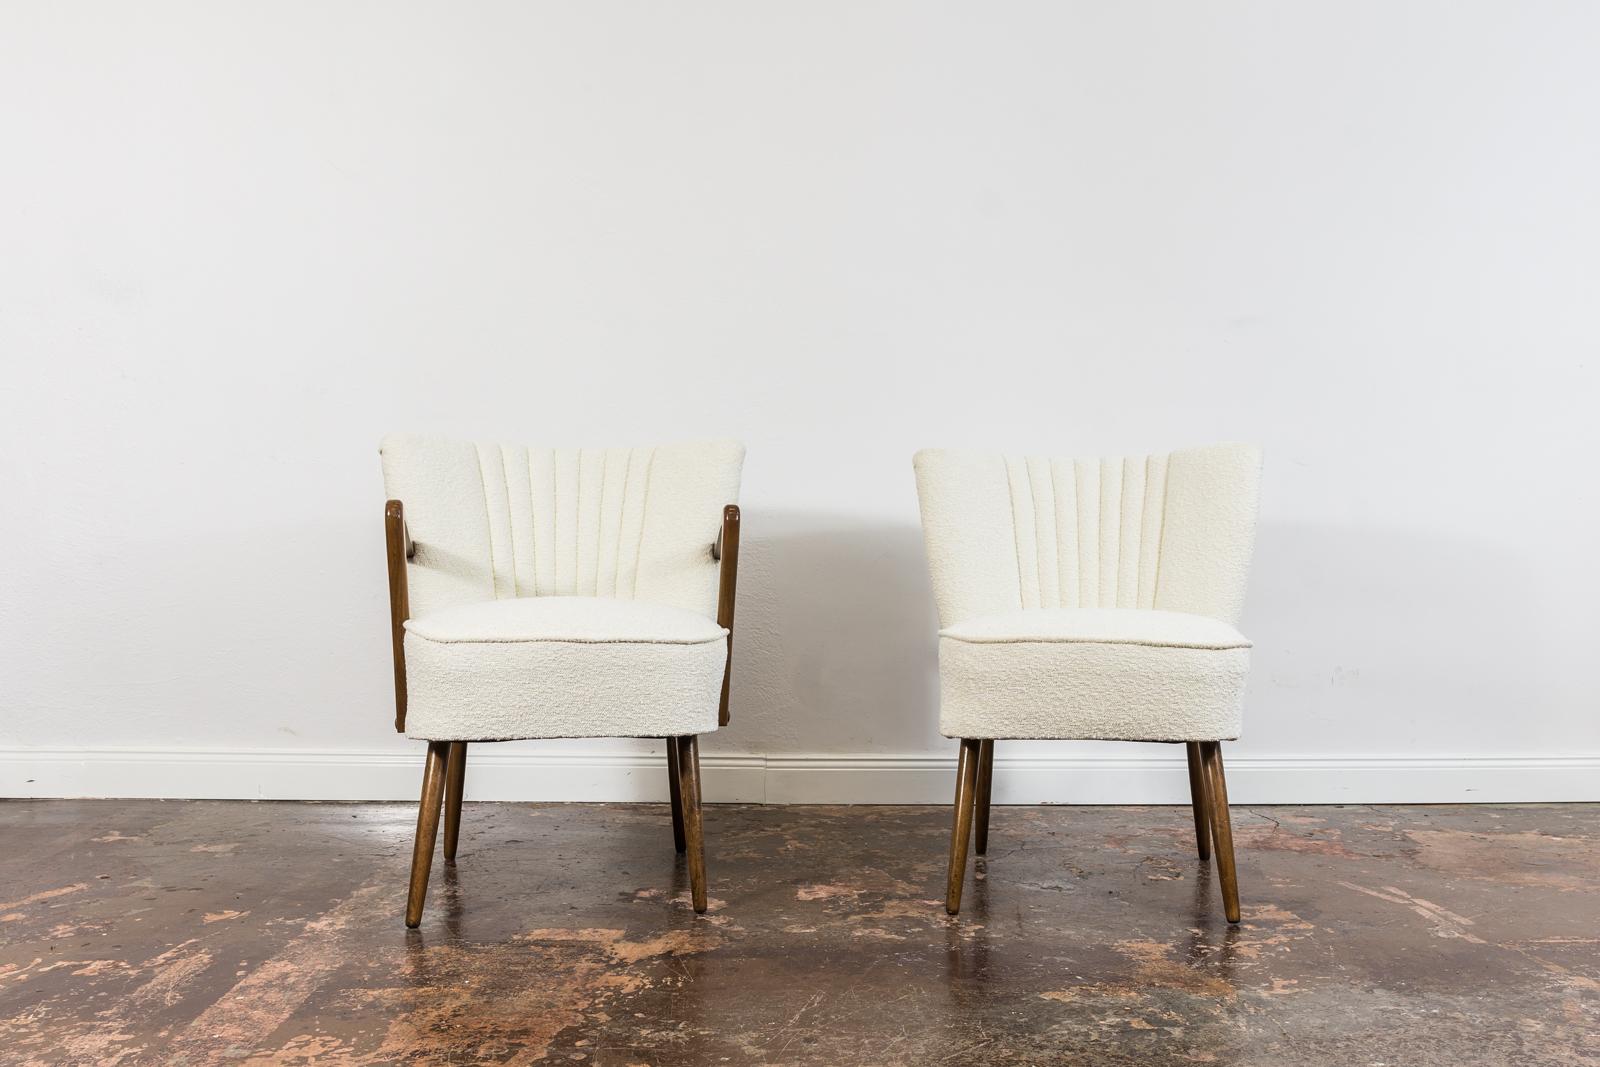 Pair of White Cream Boucle Cocktail Chairs, 1950s, Germany.
Completely restored.